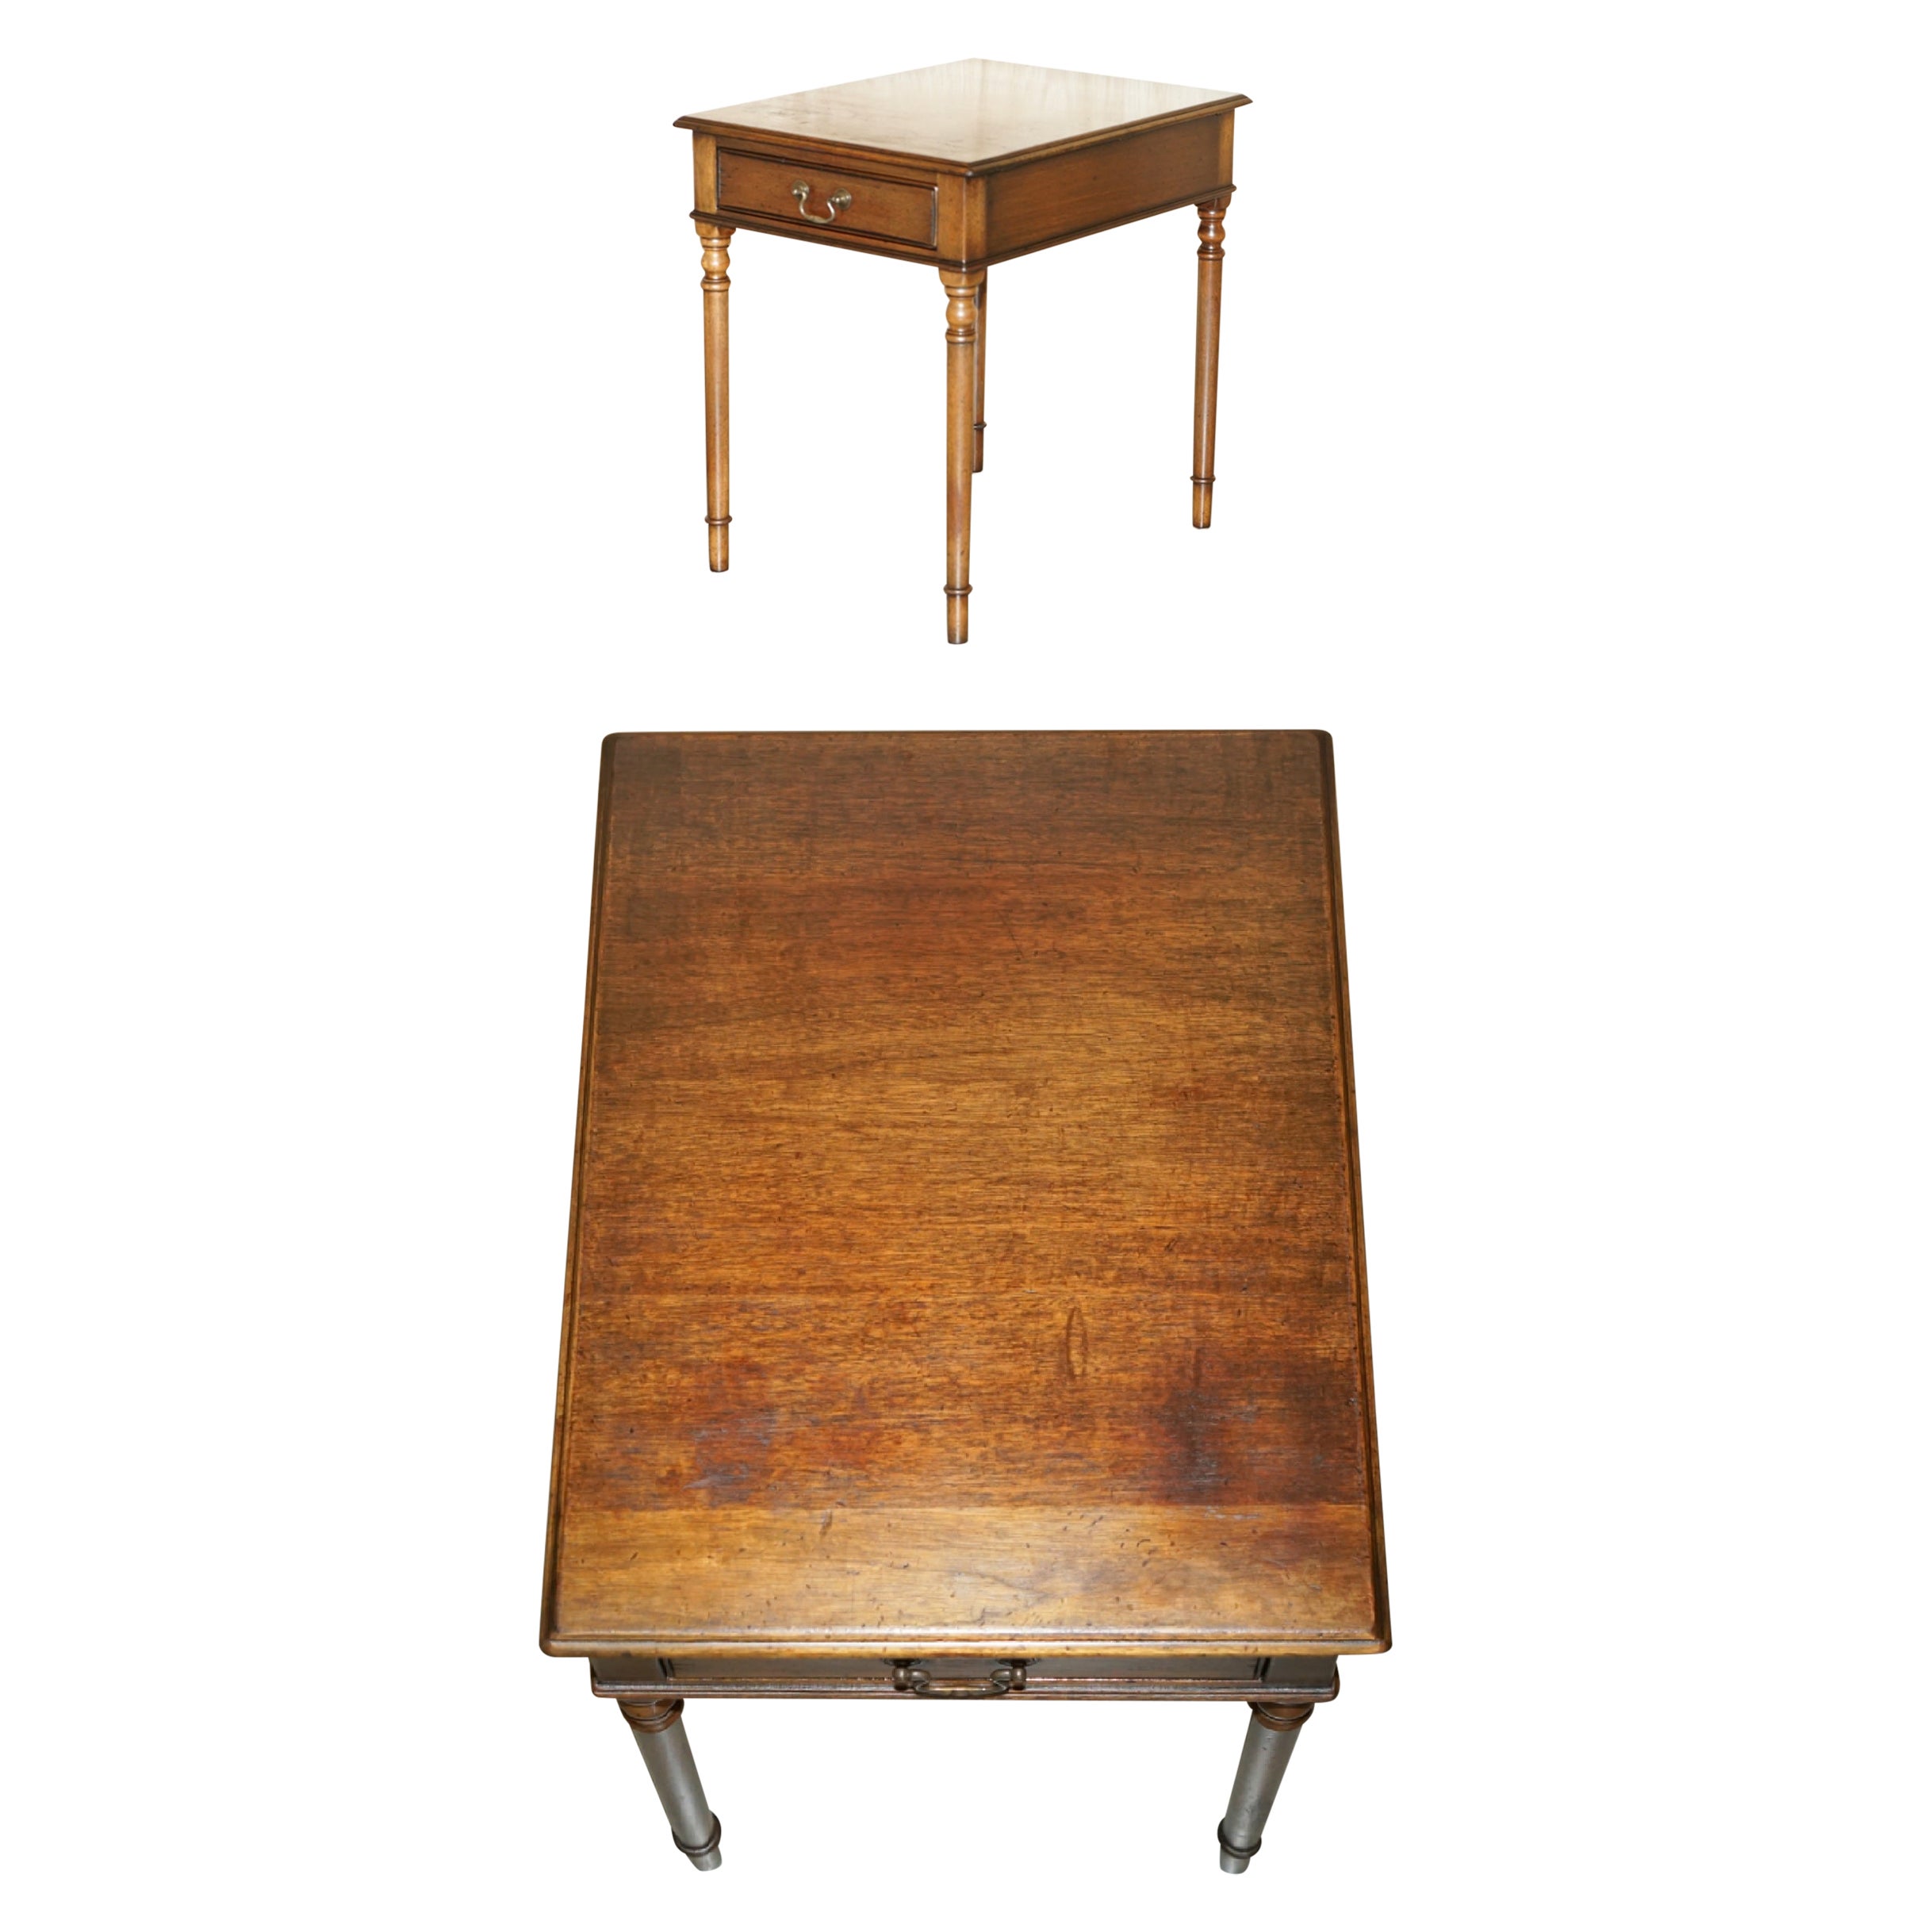 ENGLiSH COUNTRY HOUSE OAK CIRCA 1940er SINGLE DRAWER SIDE OR OCCASIONAL TABLE